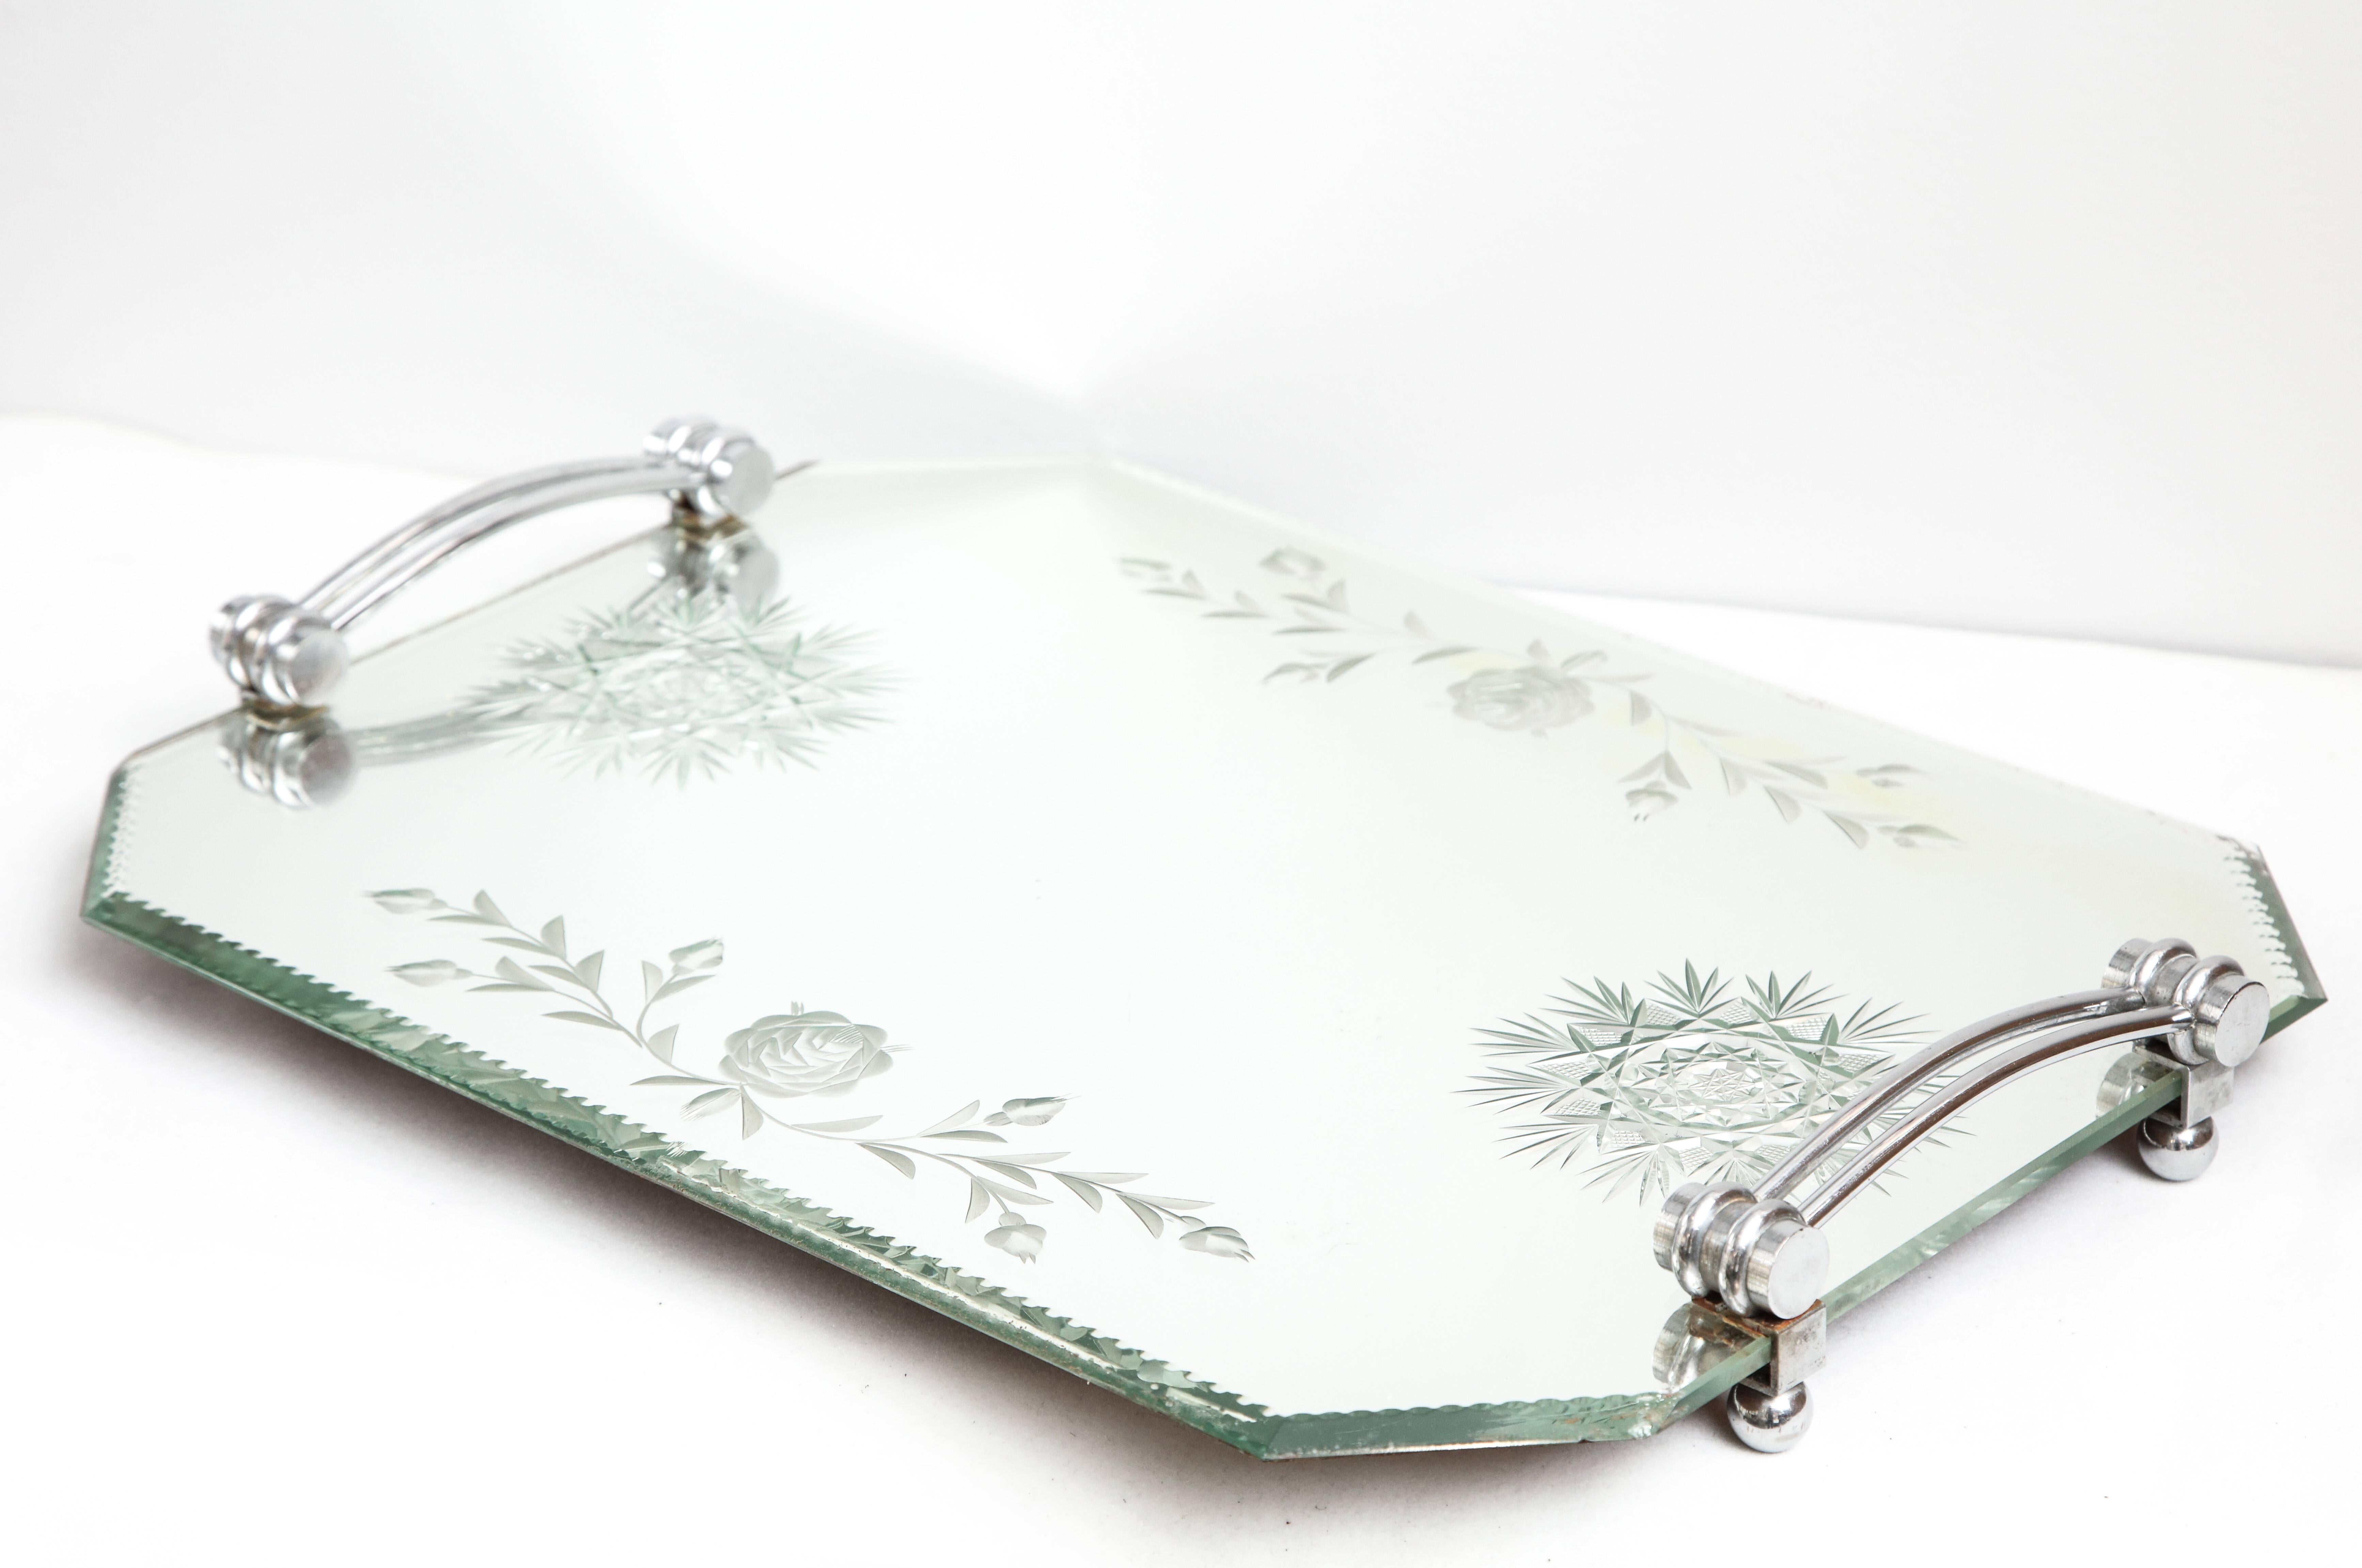 A fabulous French deeply etched and bevelled mirrored vanity tray with deco chrome handles and mounted on chrome feet.